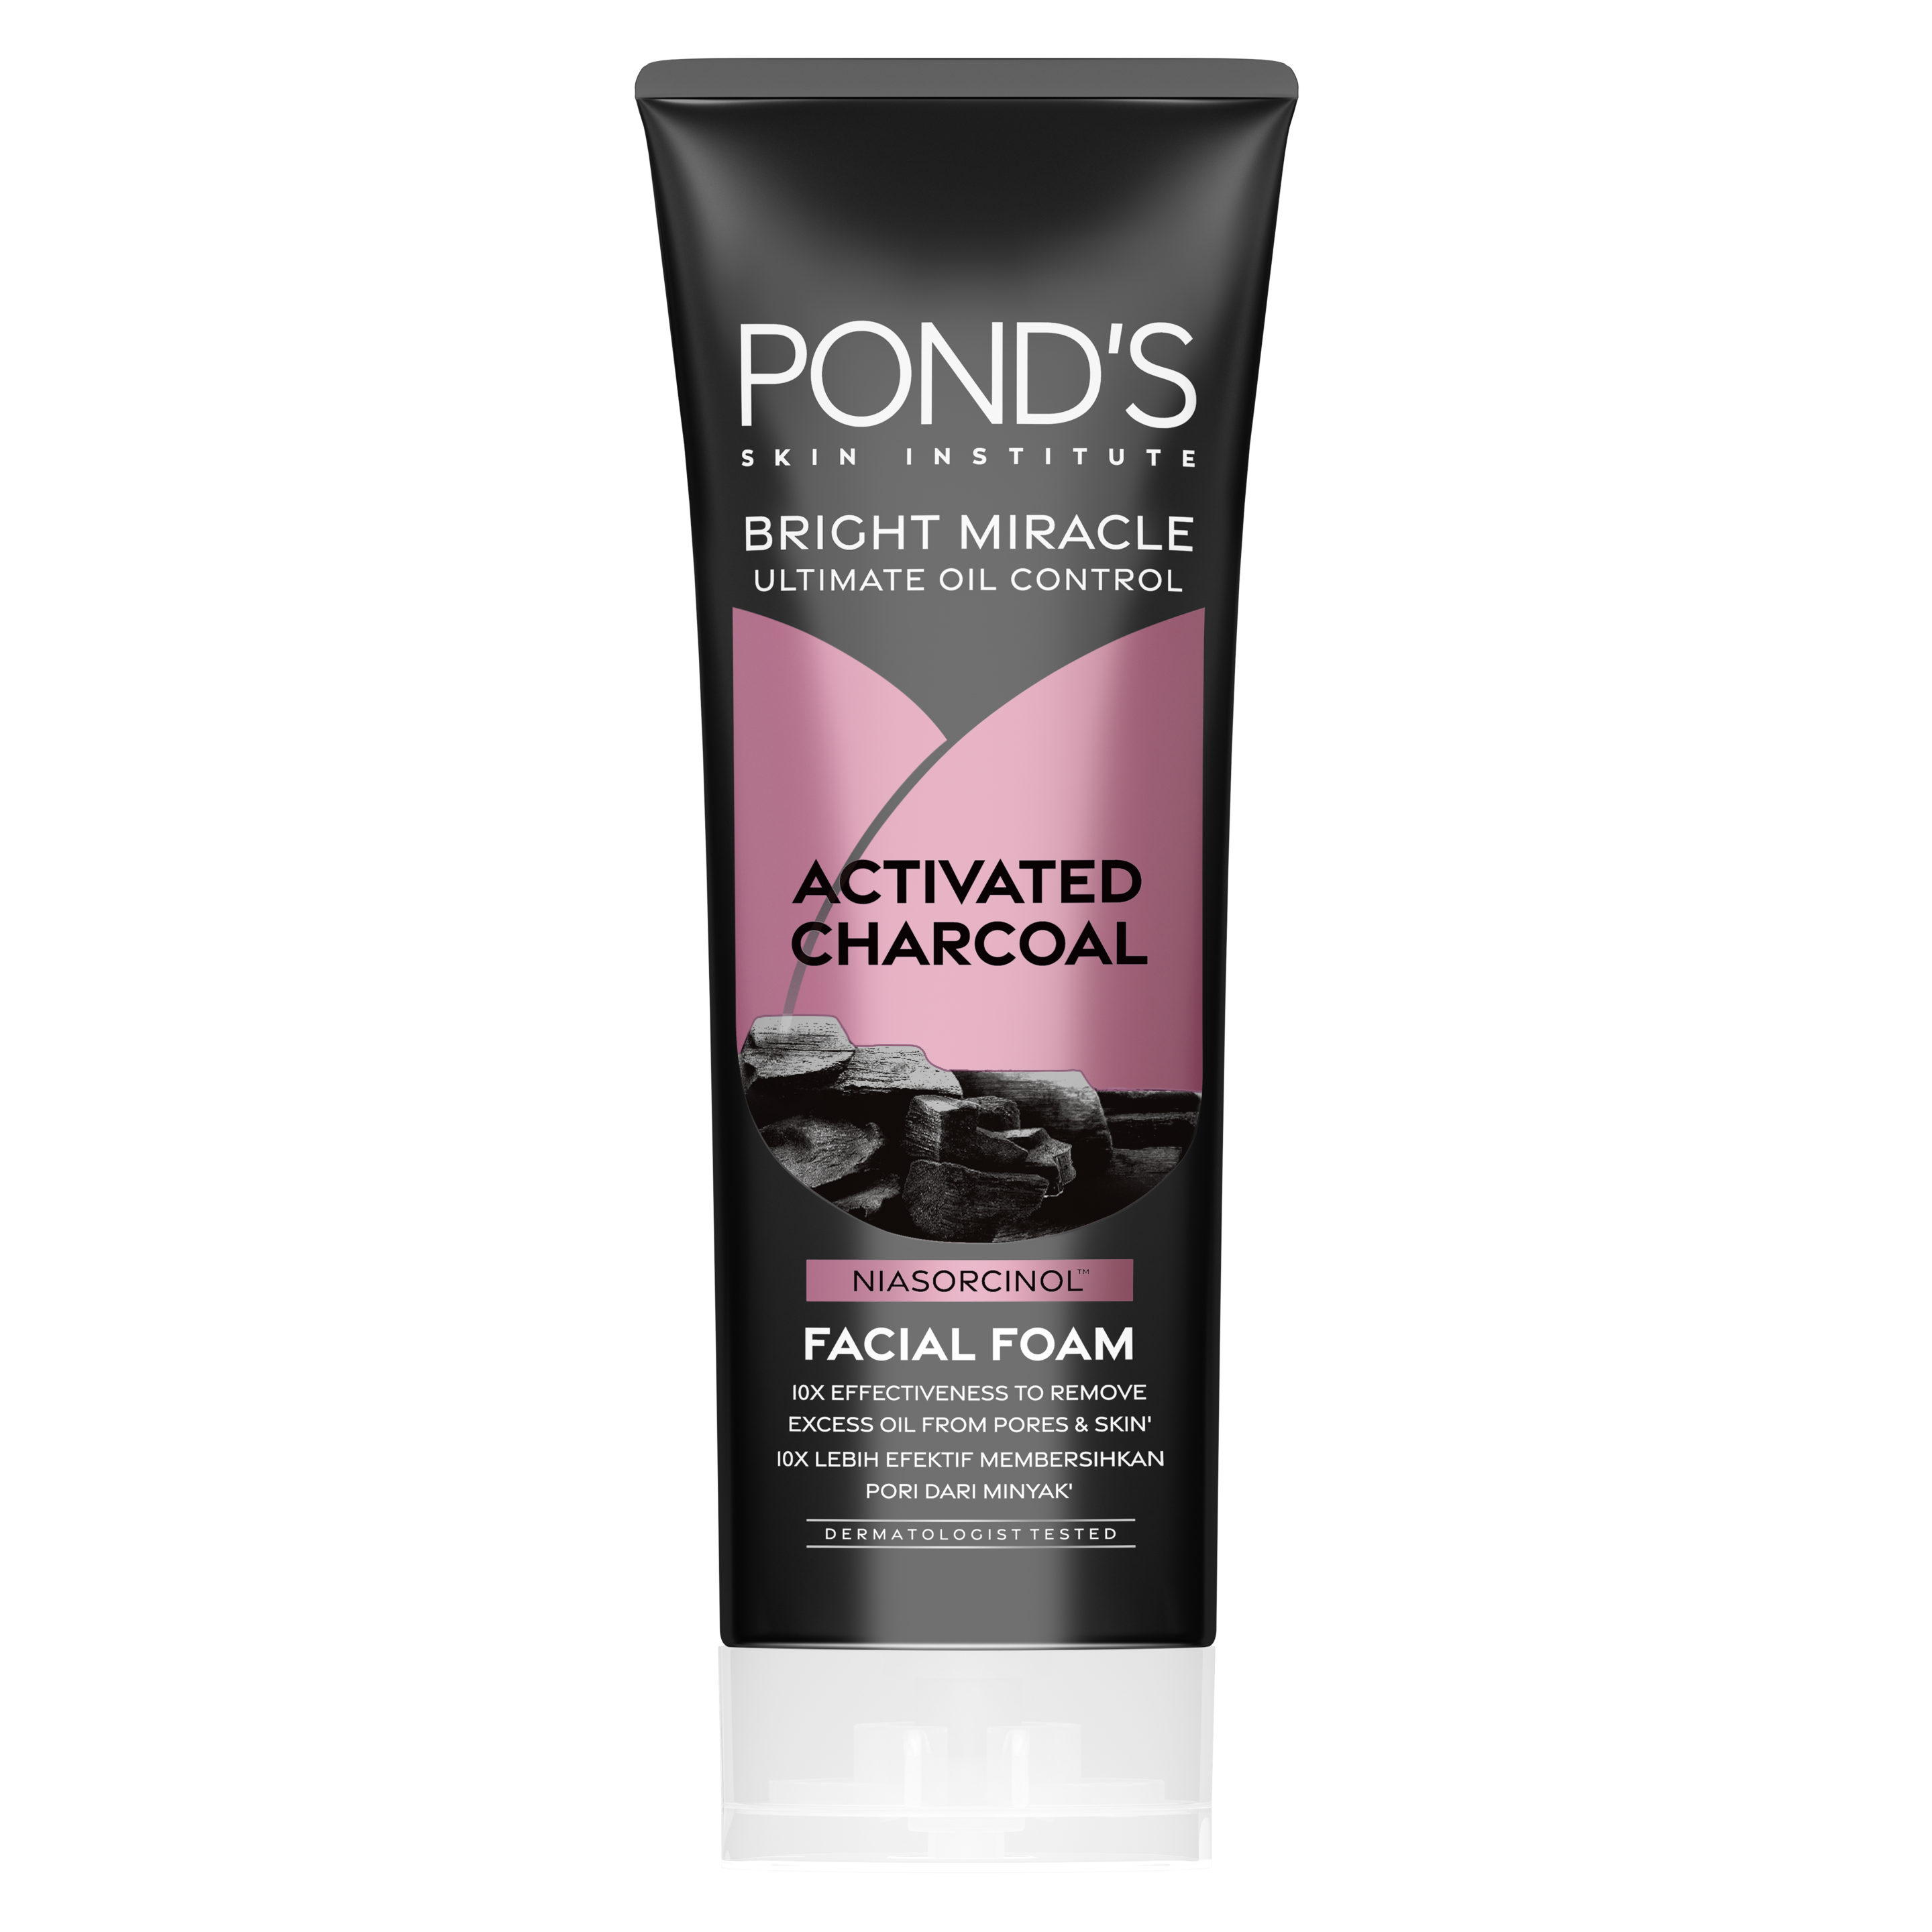 Pond's Bright Miracle Ultimate Oil Control Facial Foam